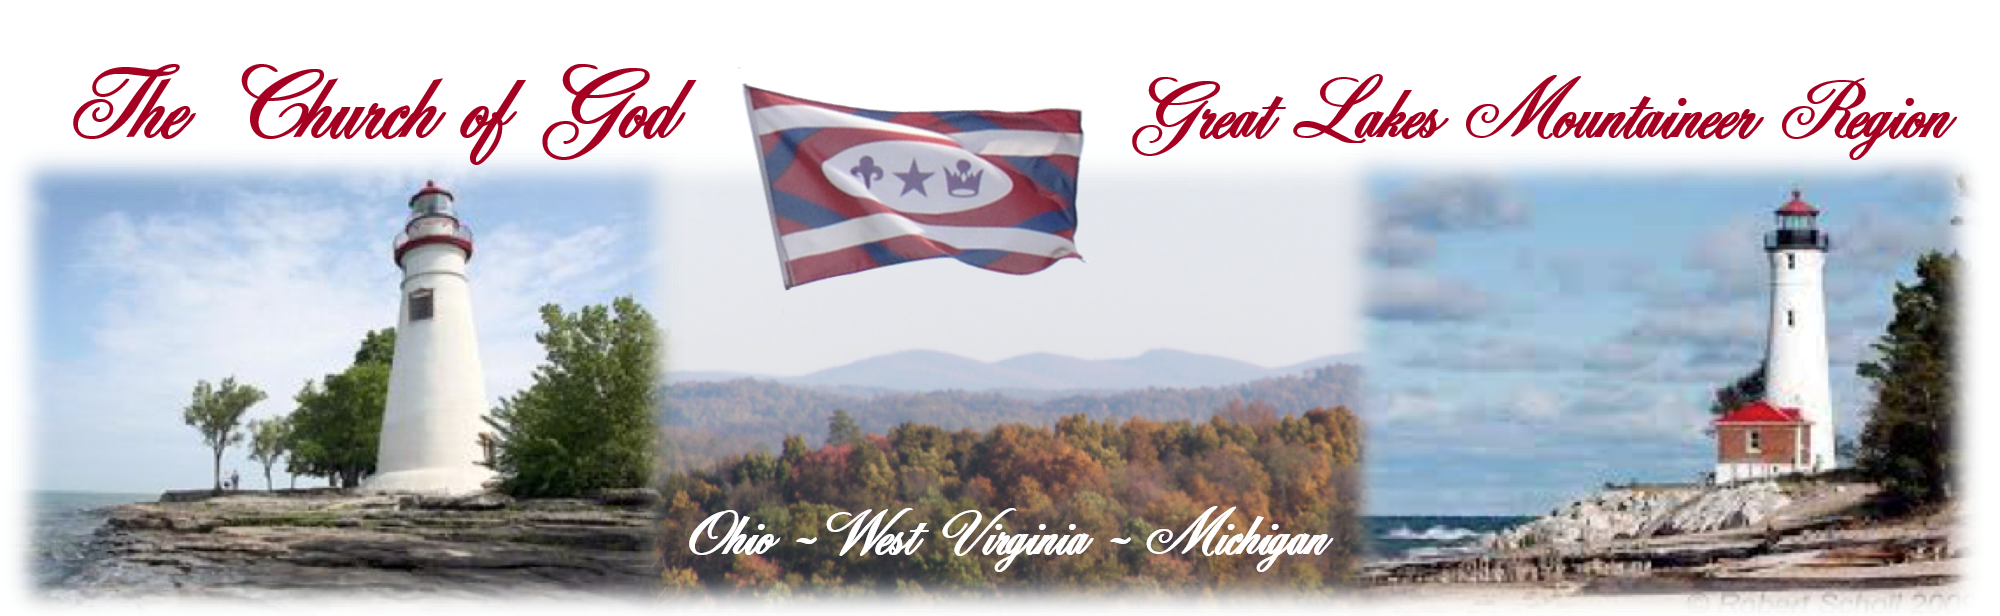 TCOG-GLMR-Red-w-real-flag-in-fall-2